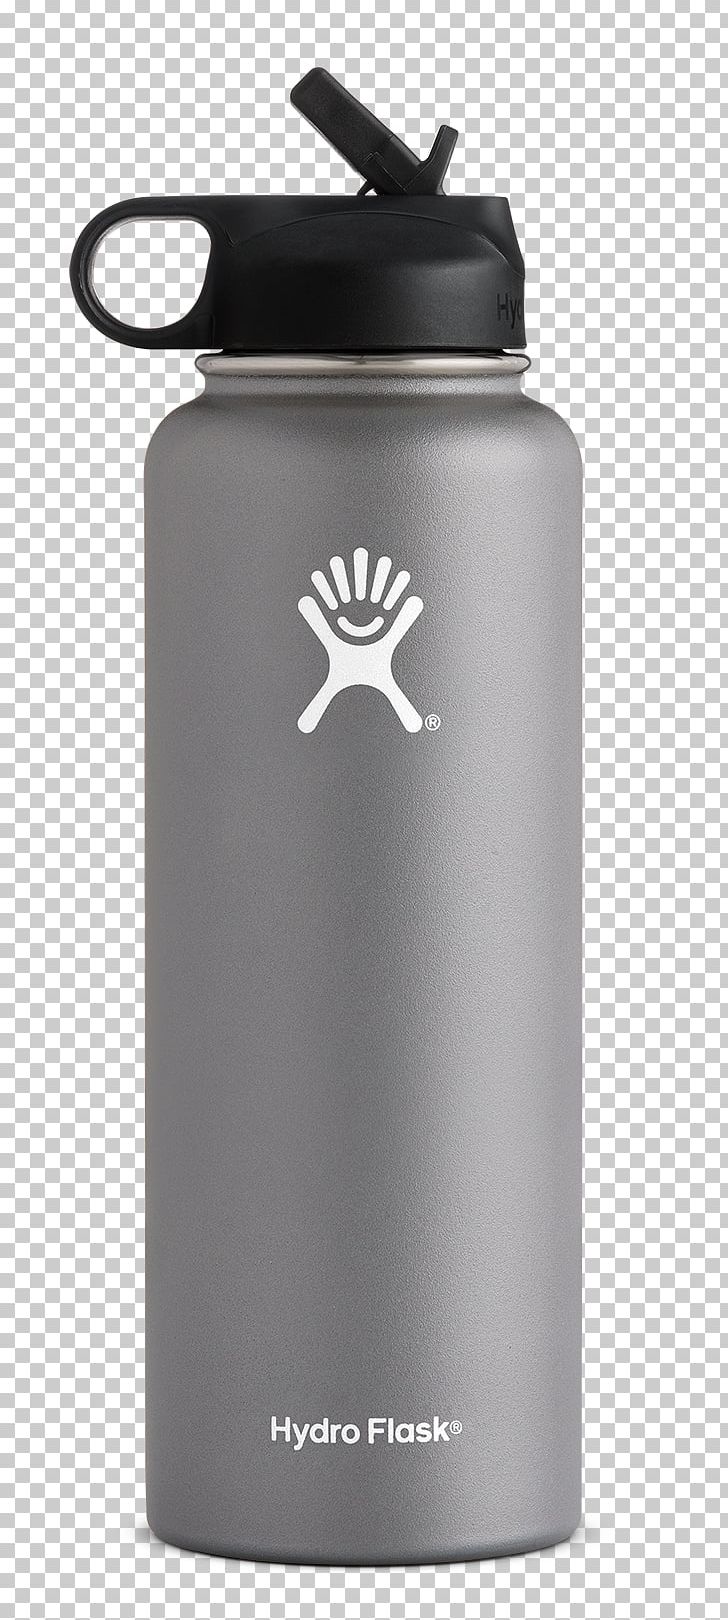 Lid Water Bottles Hydro Flask Thermoses PNG, Clipart, Bottle, Drink, Drinking Straw, Drinkware, Flask Free PNG Download